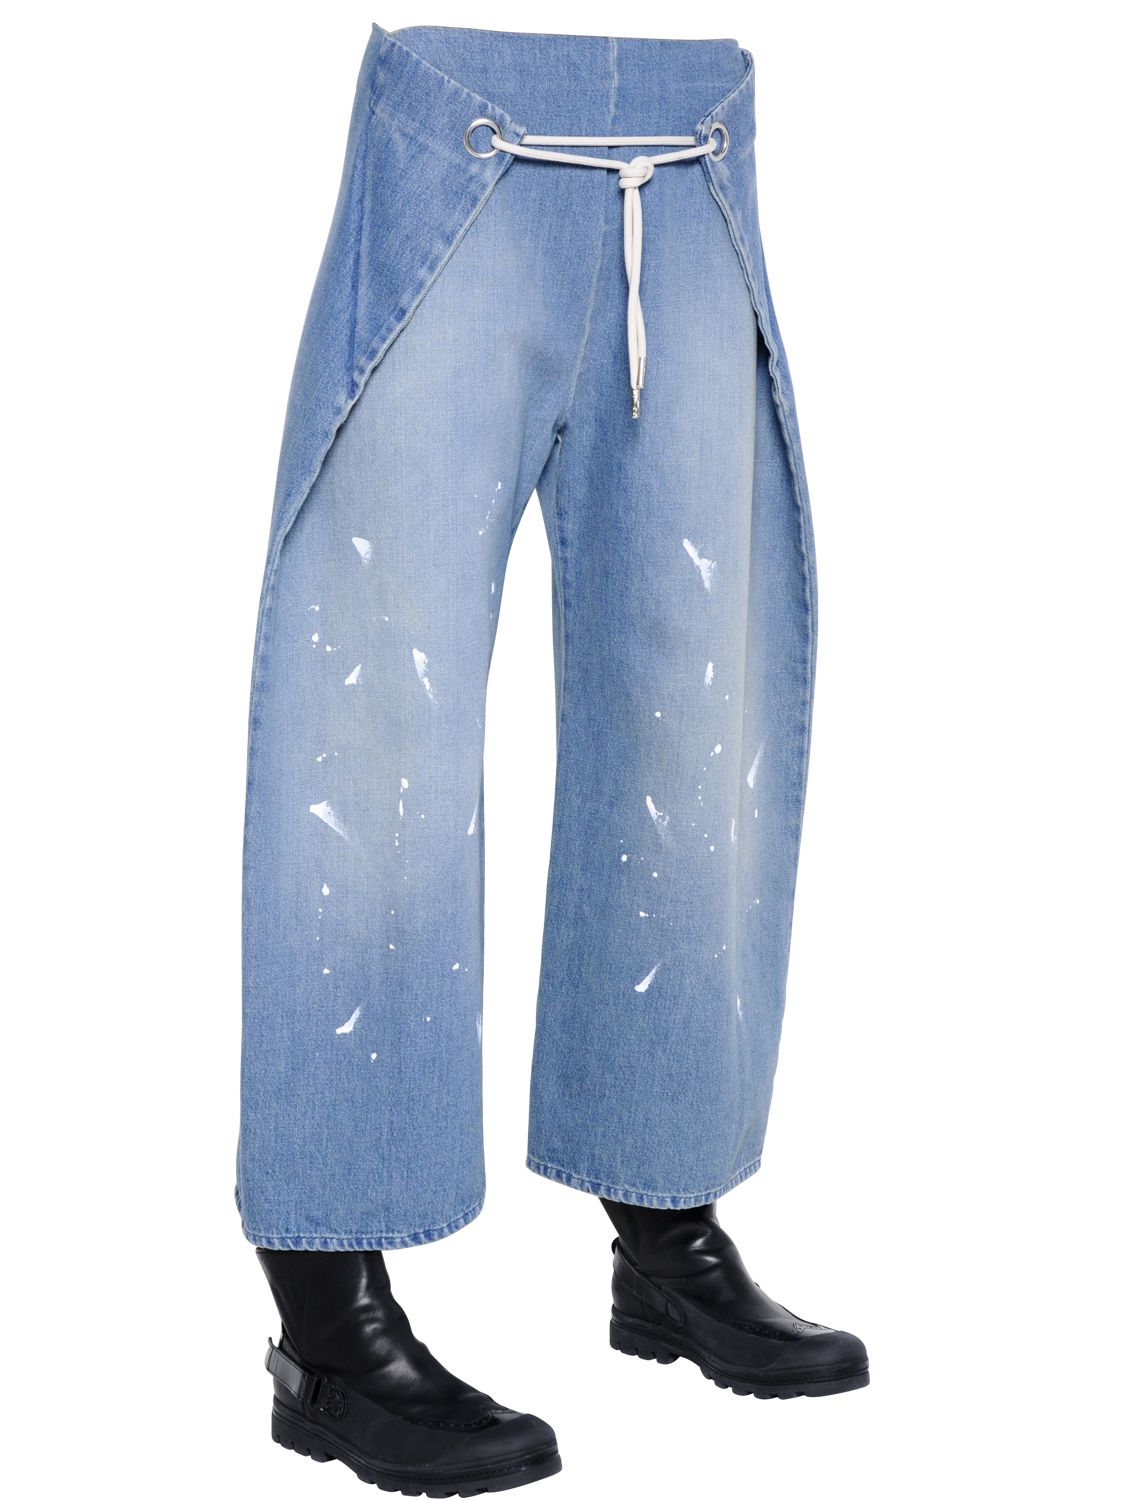 MM6 by Maison Martin Margiela Stone Washed Cotton Denim Jeans in Blue ...